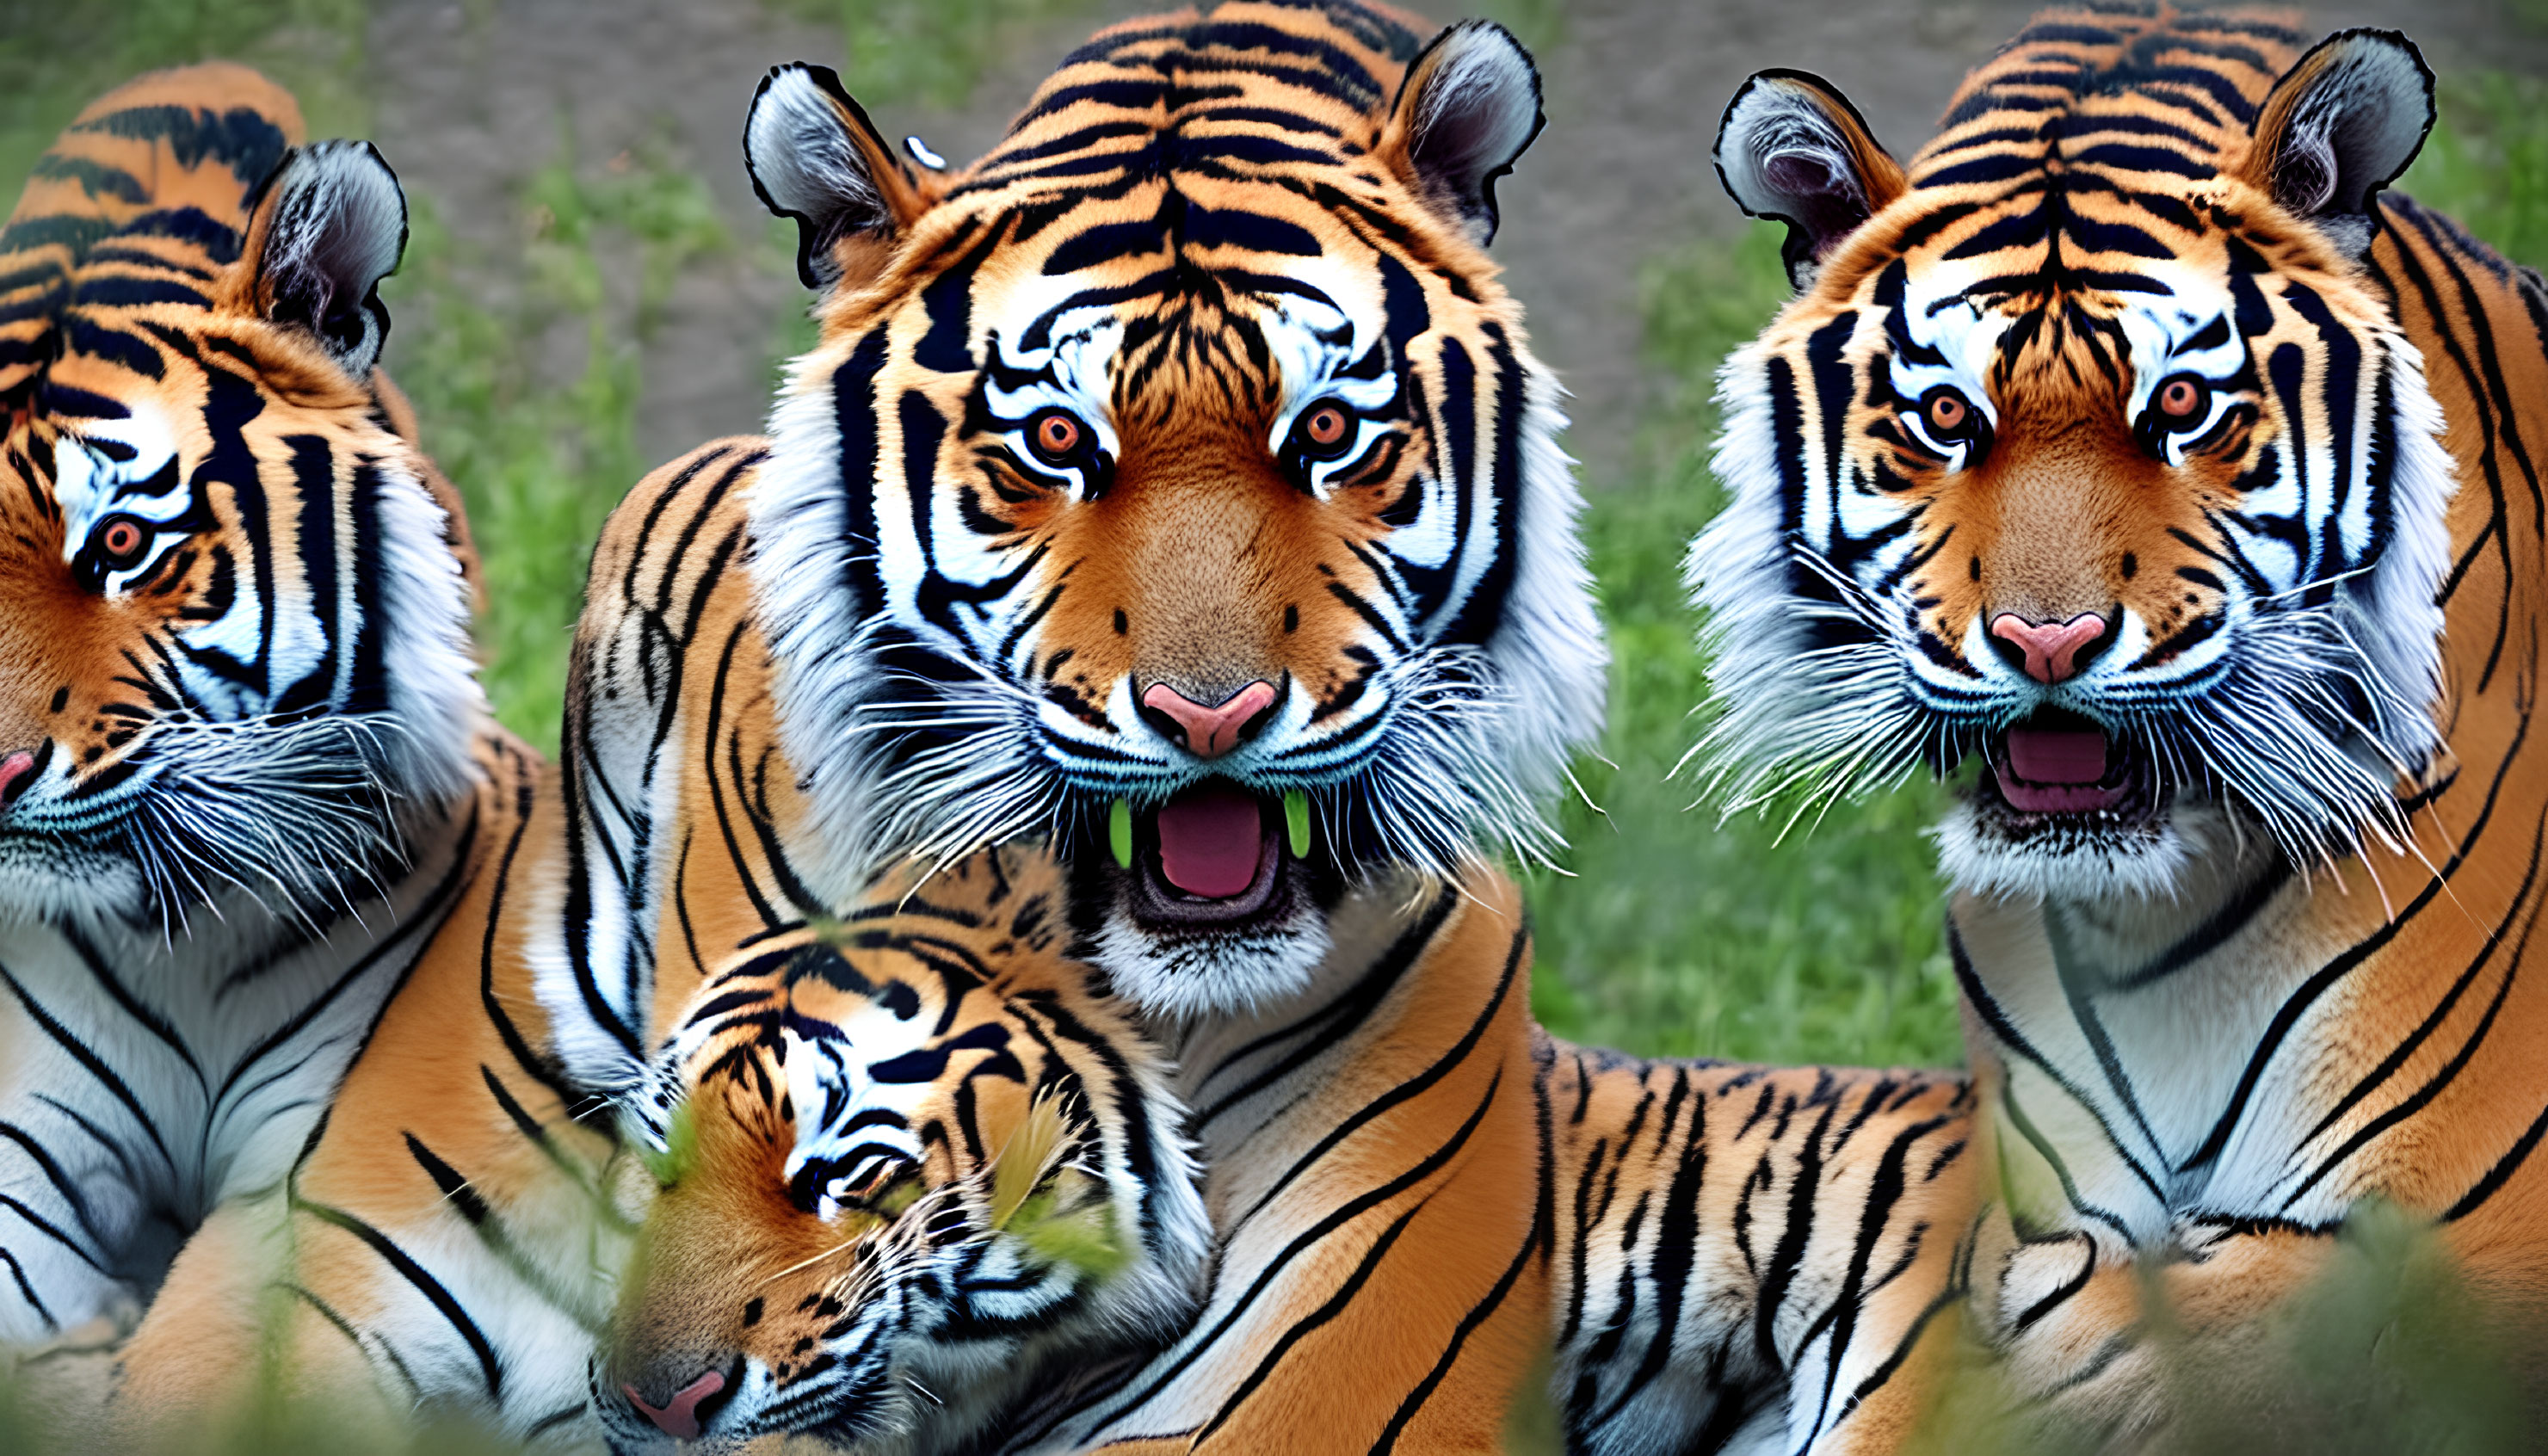 Three Tigers Resting in Grass, Two Facing Camera